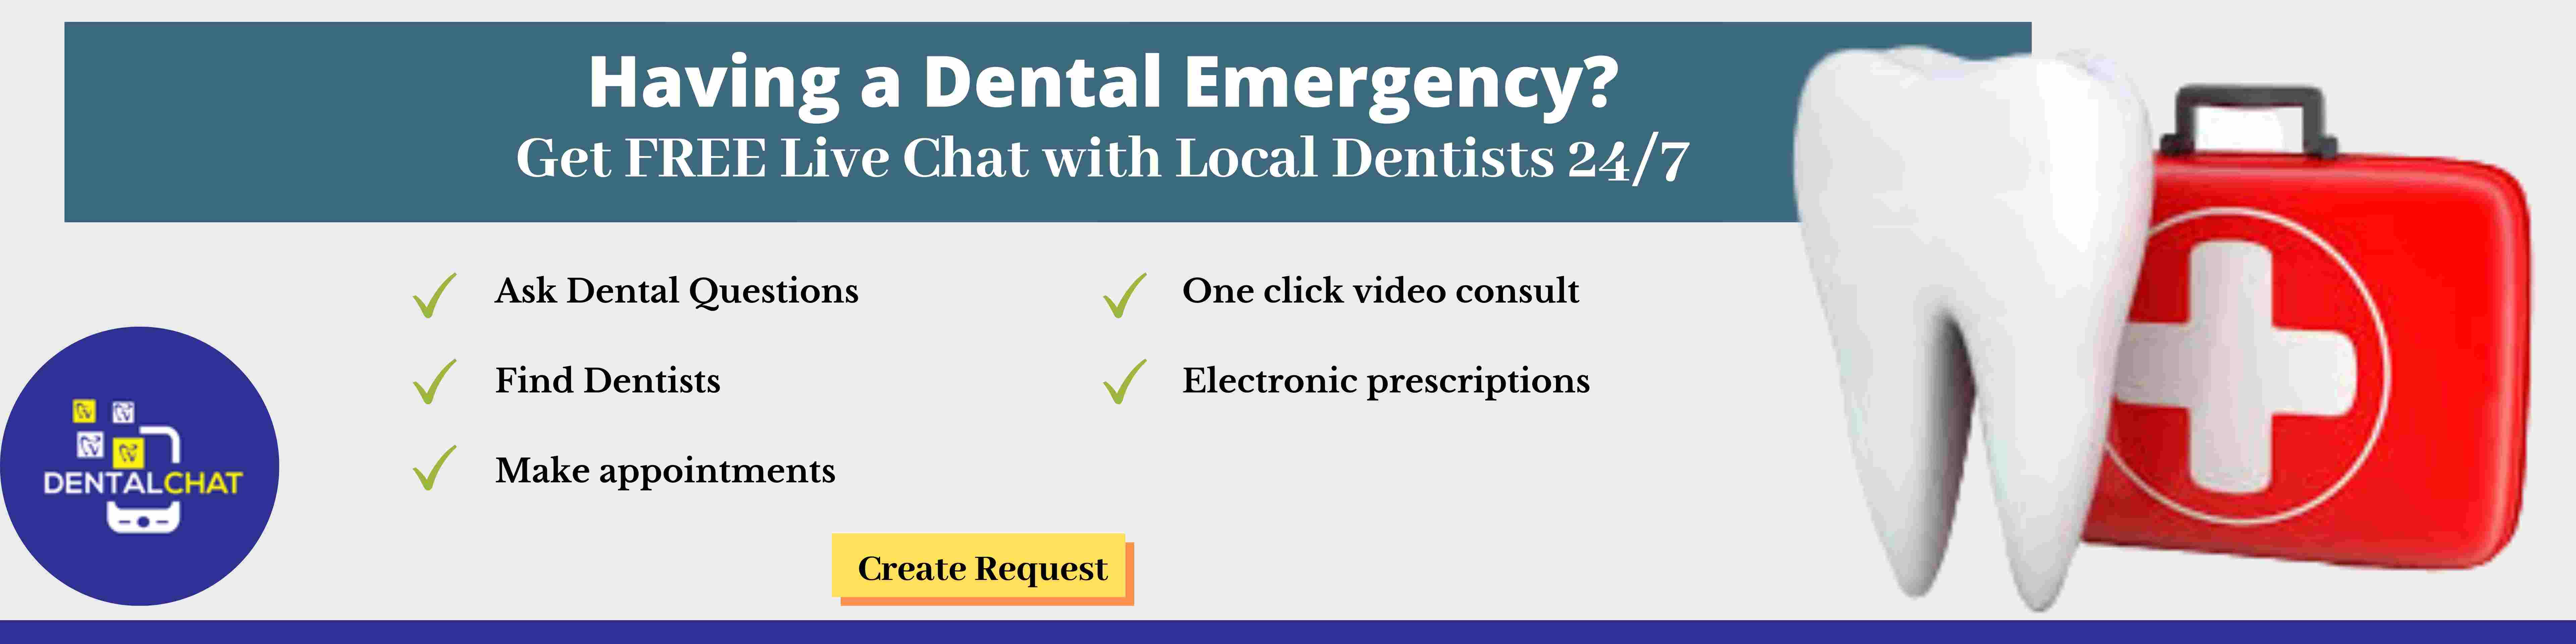 Urgent Dental Care Chat, Local Emergency Dentistry Questions Chatting Online